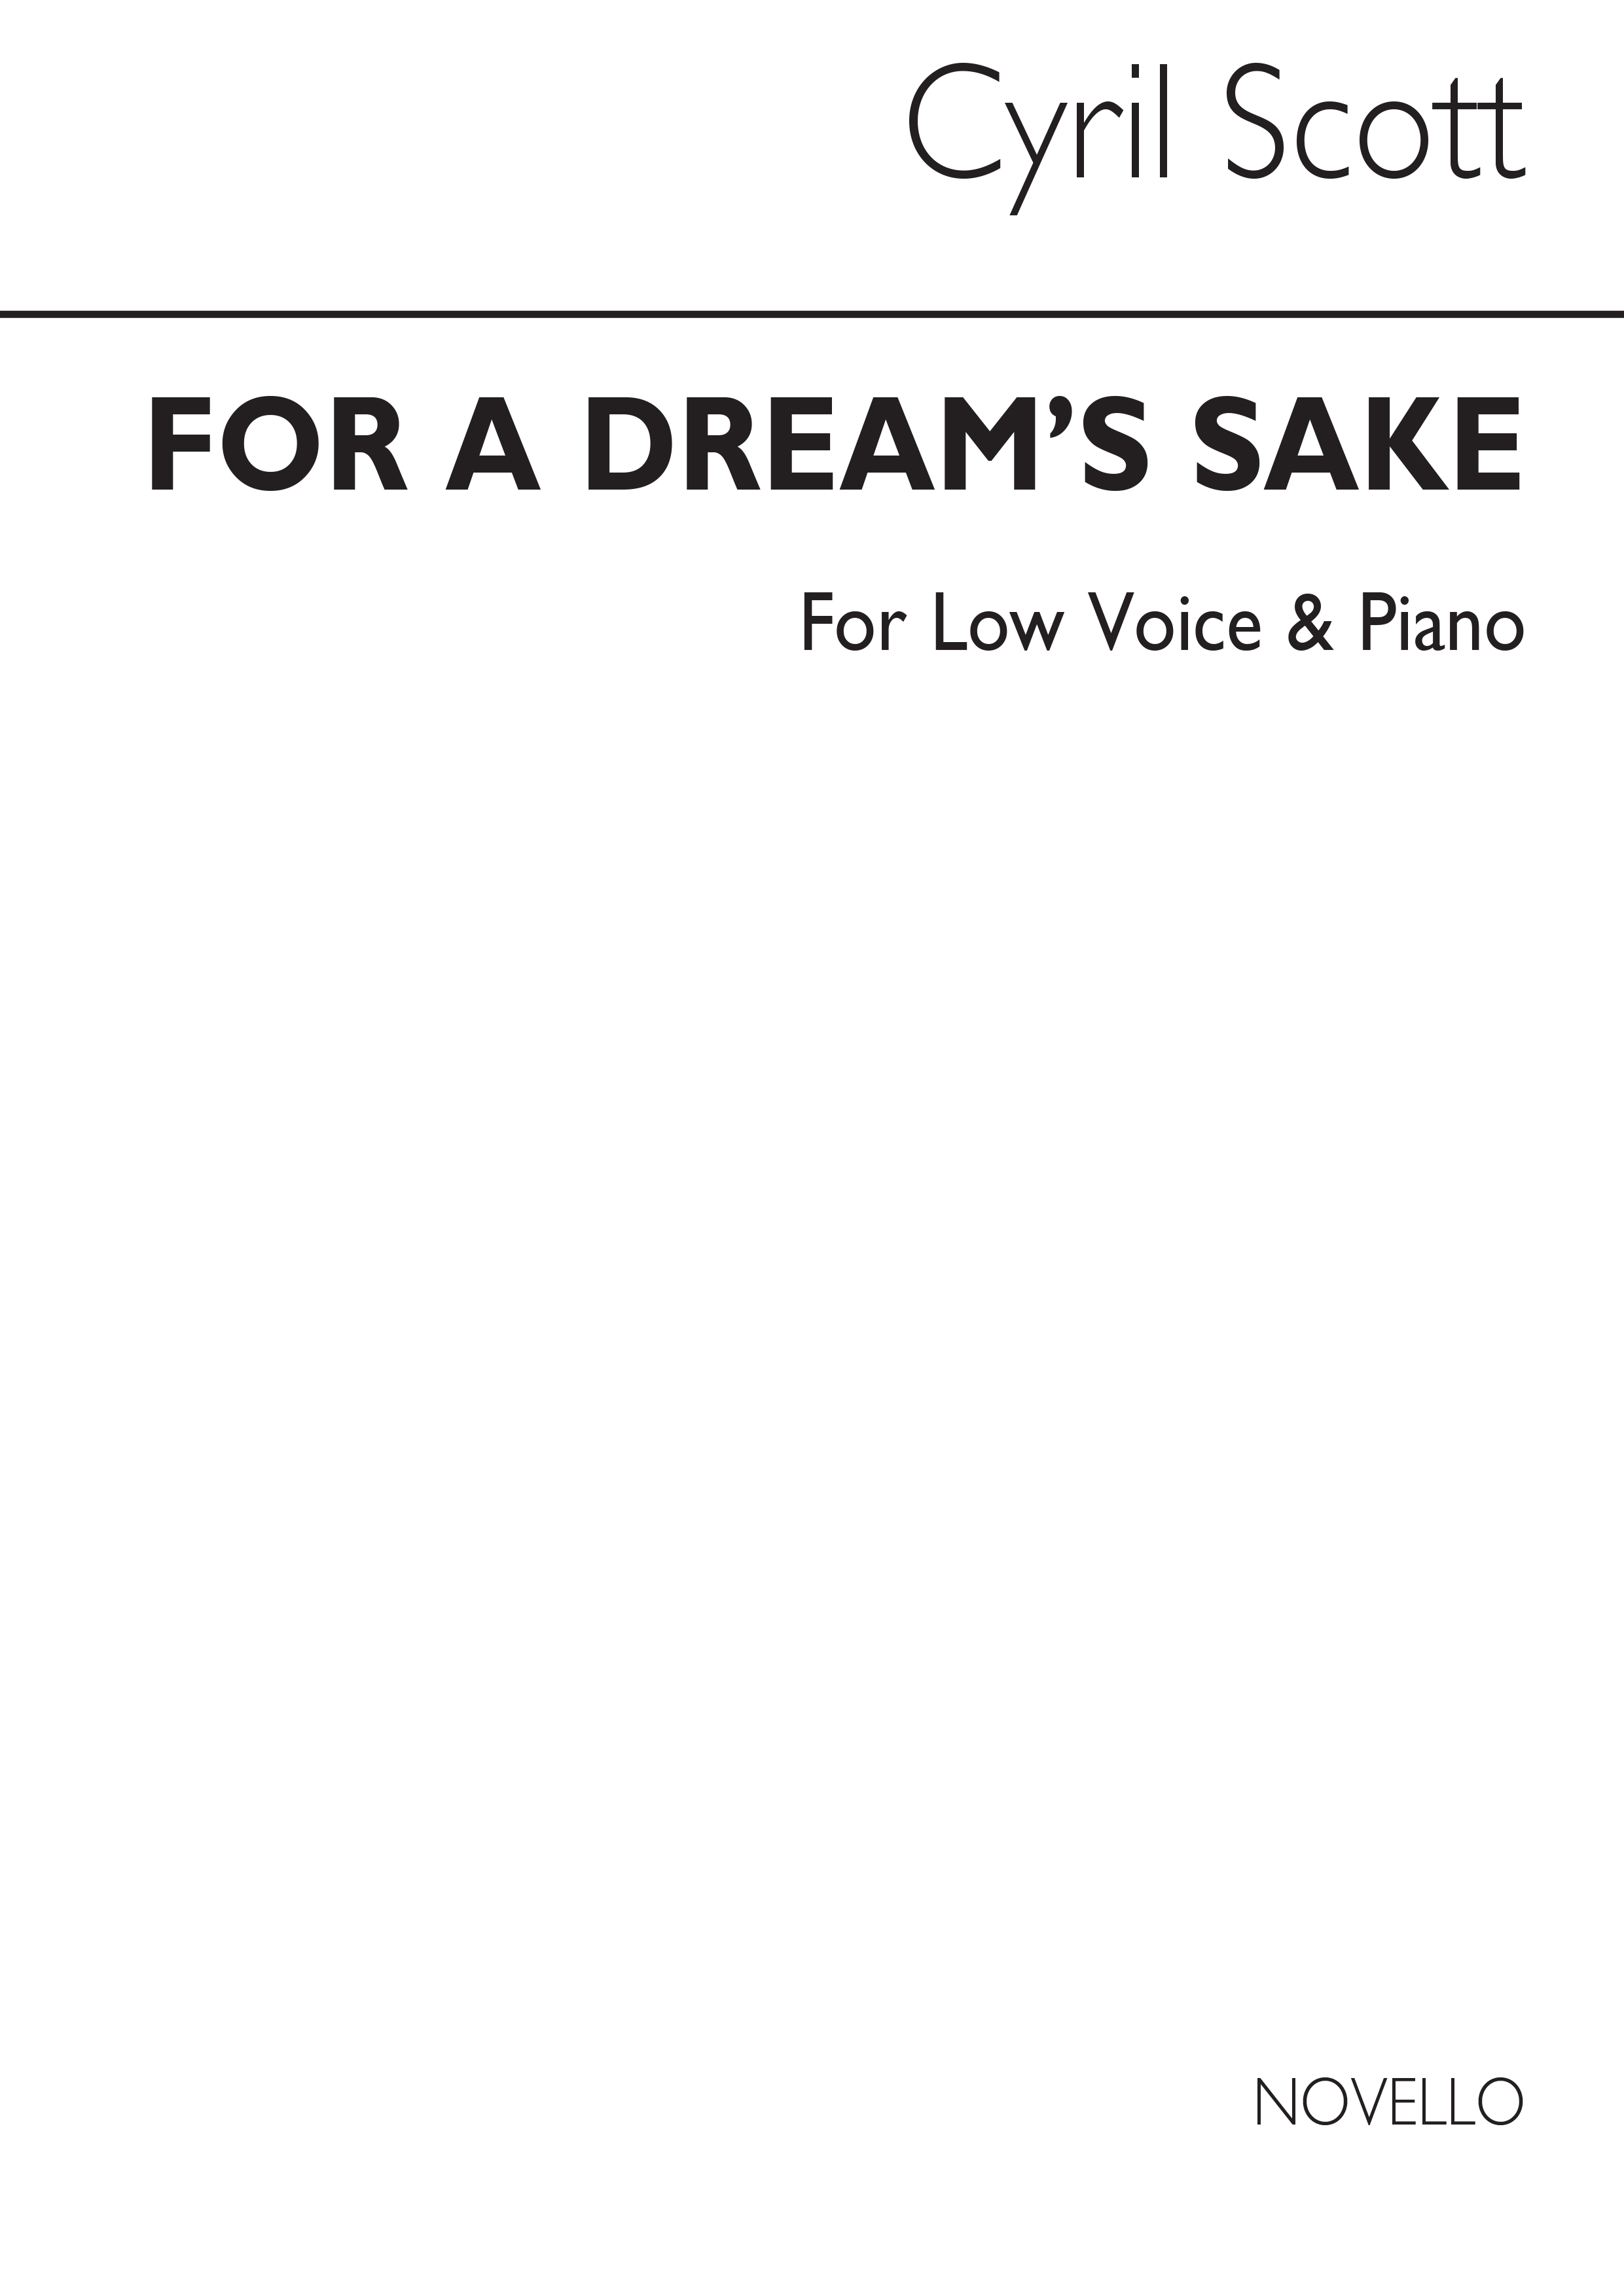 Cyril Scott: For A Dream's Sake-low Voice/Piano (Key-a Flat)